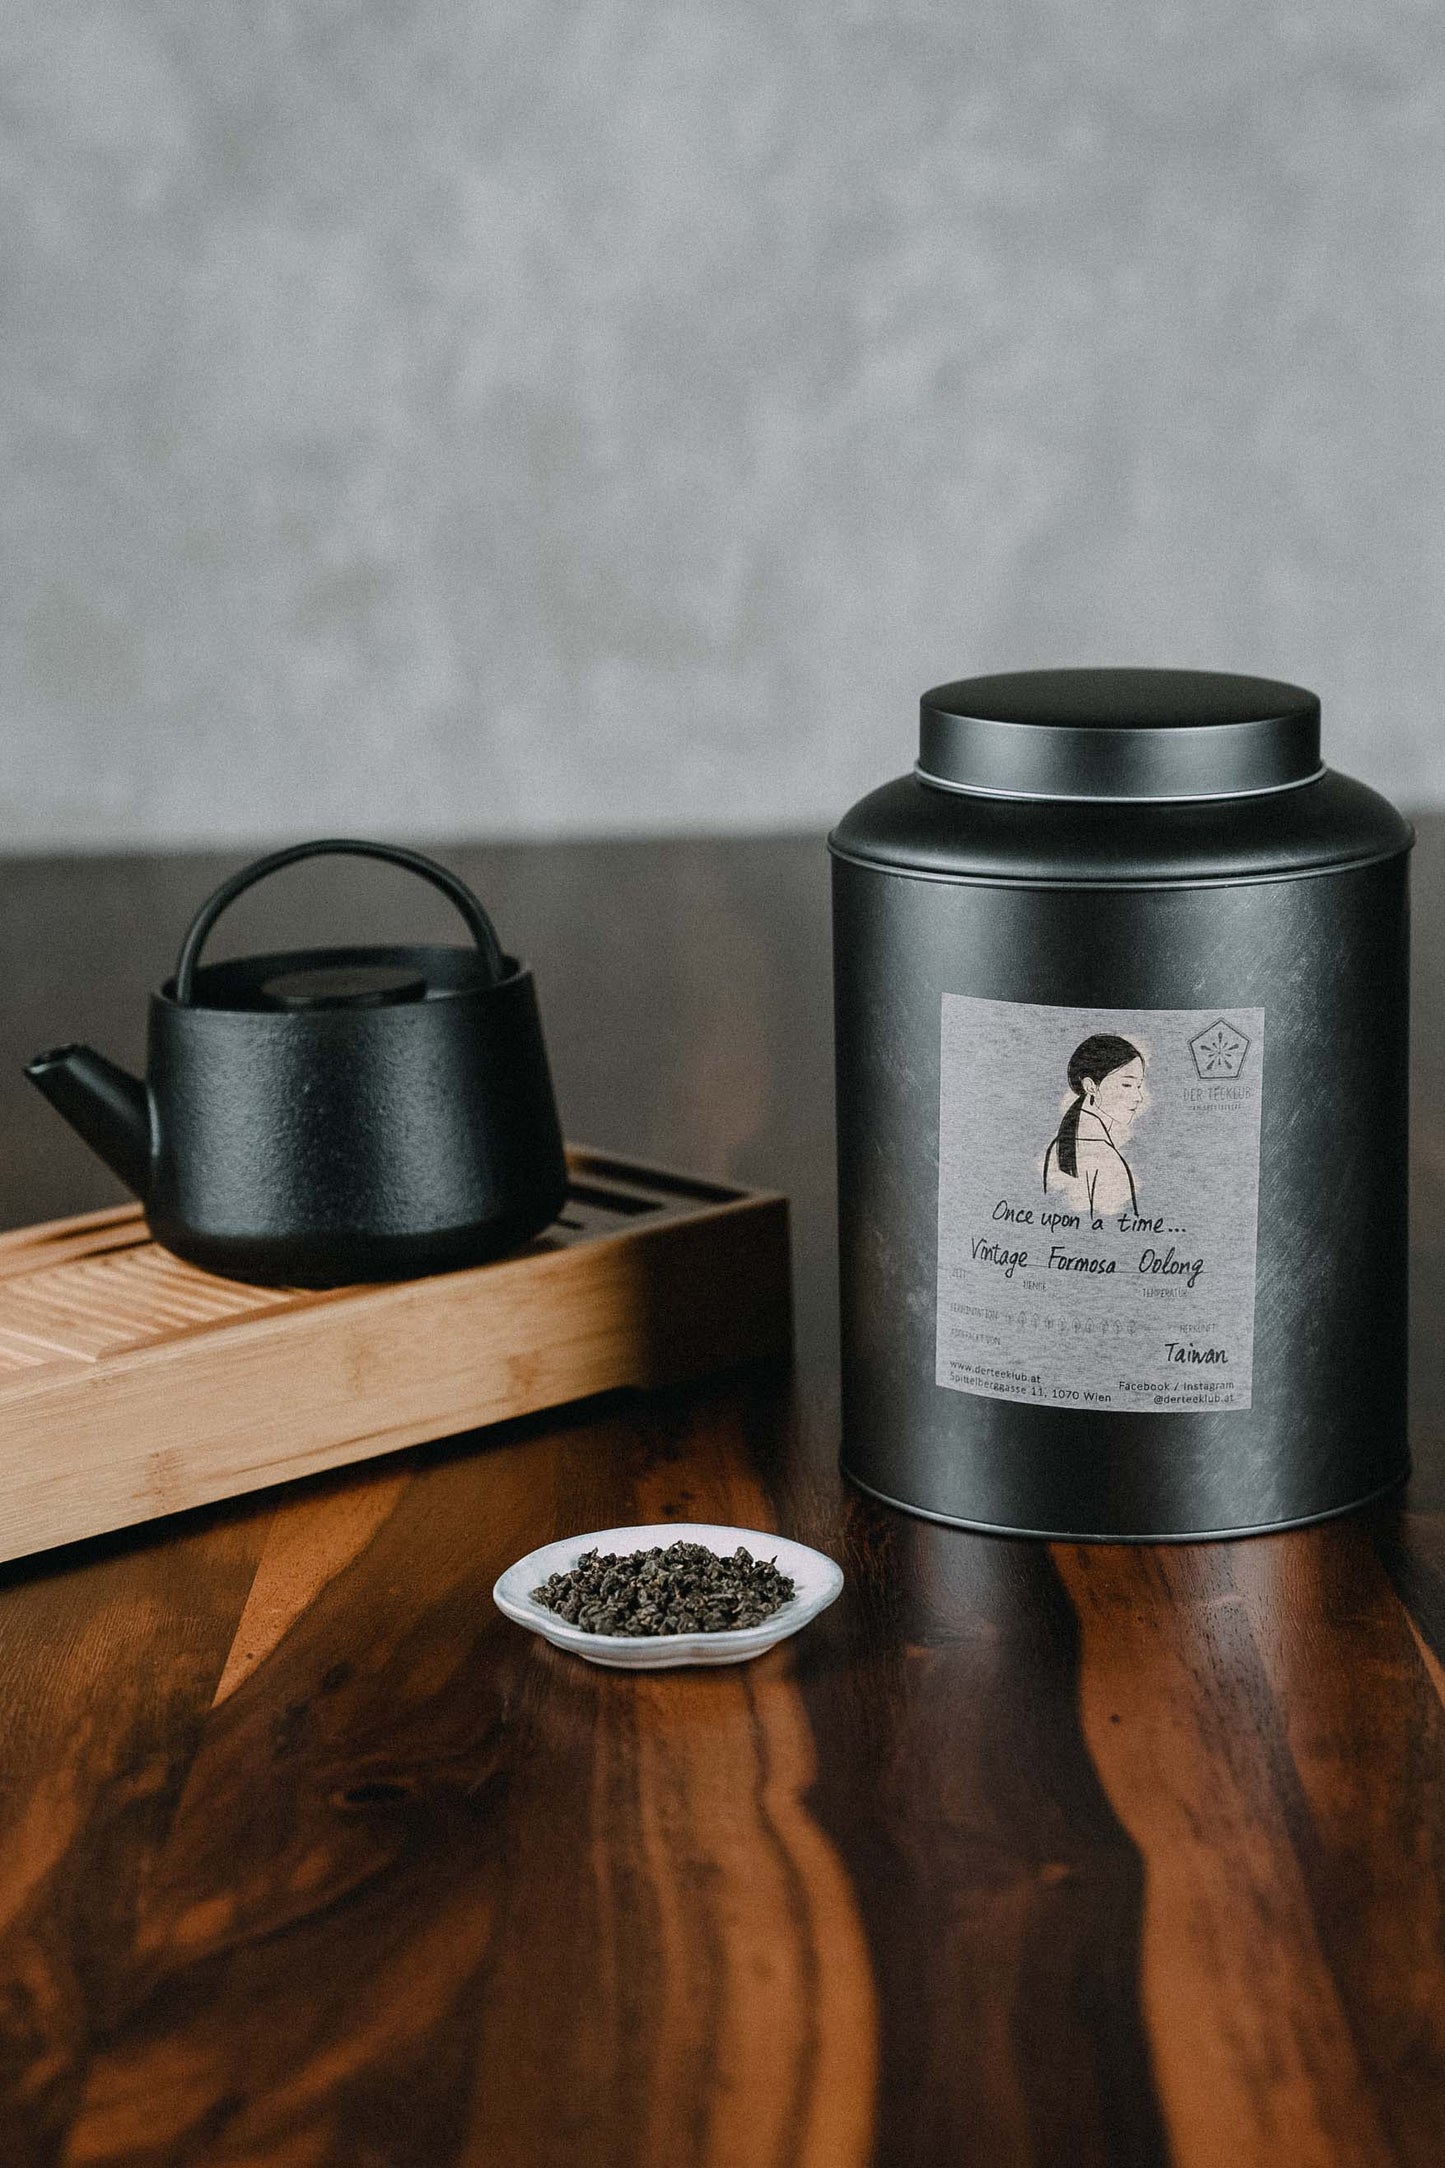 "Once upon a Time" – Vintage Formosa Oolong